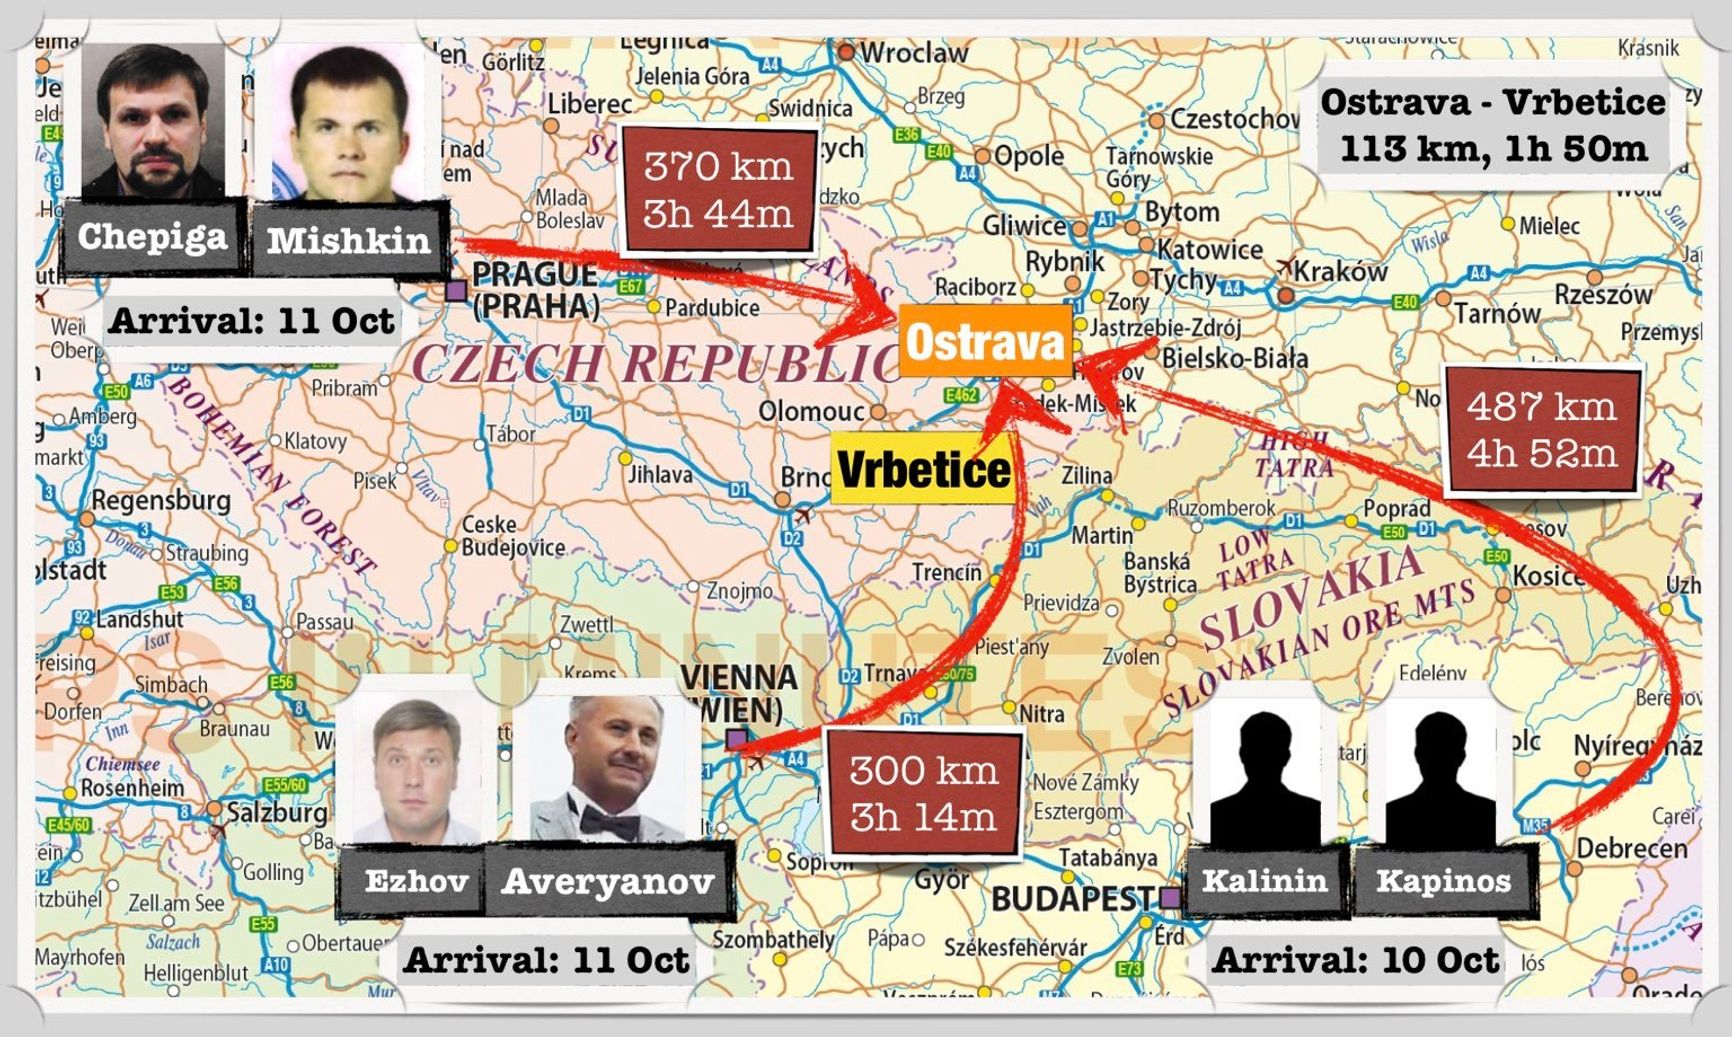 Timeline and map of arrivals of members of 29155 in the area of the Vrbetice explosions in October 2014